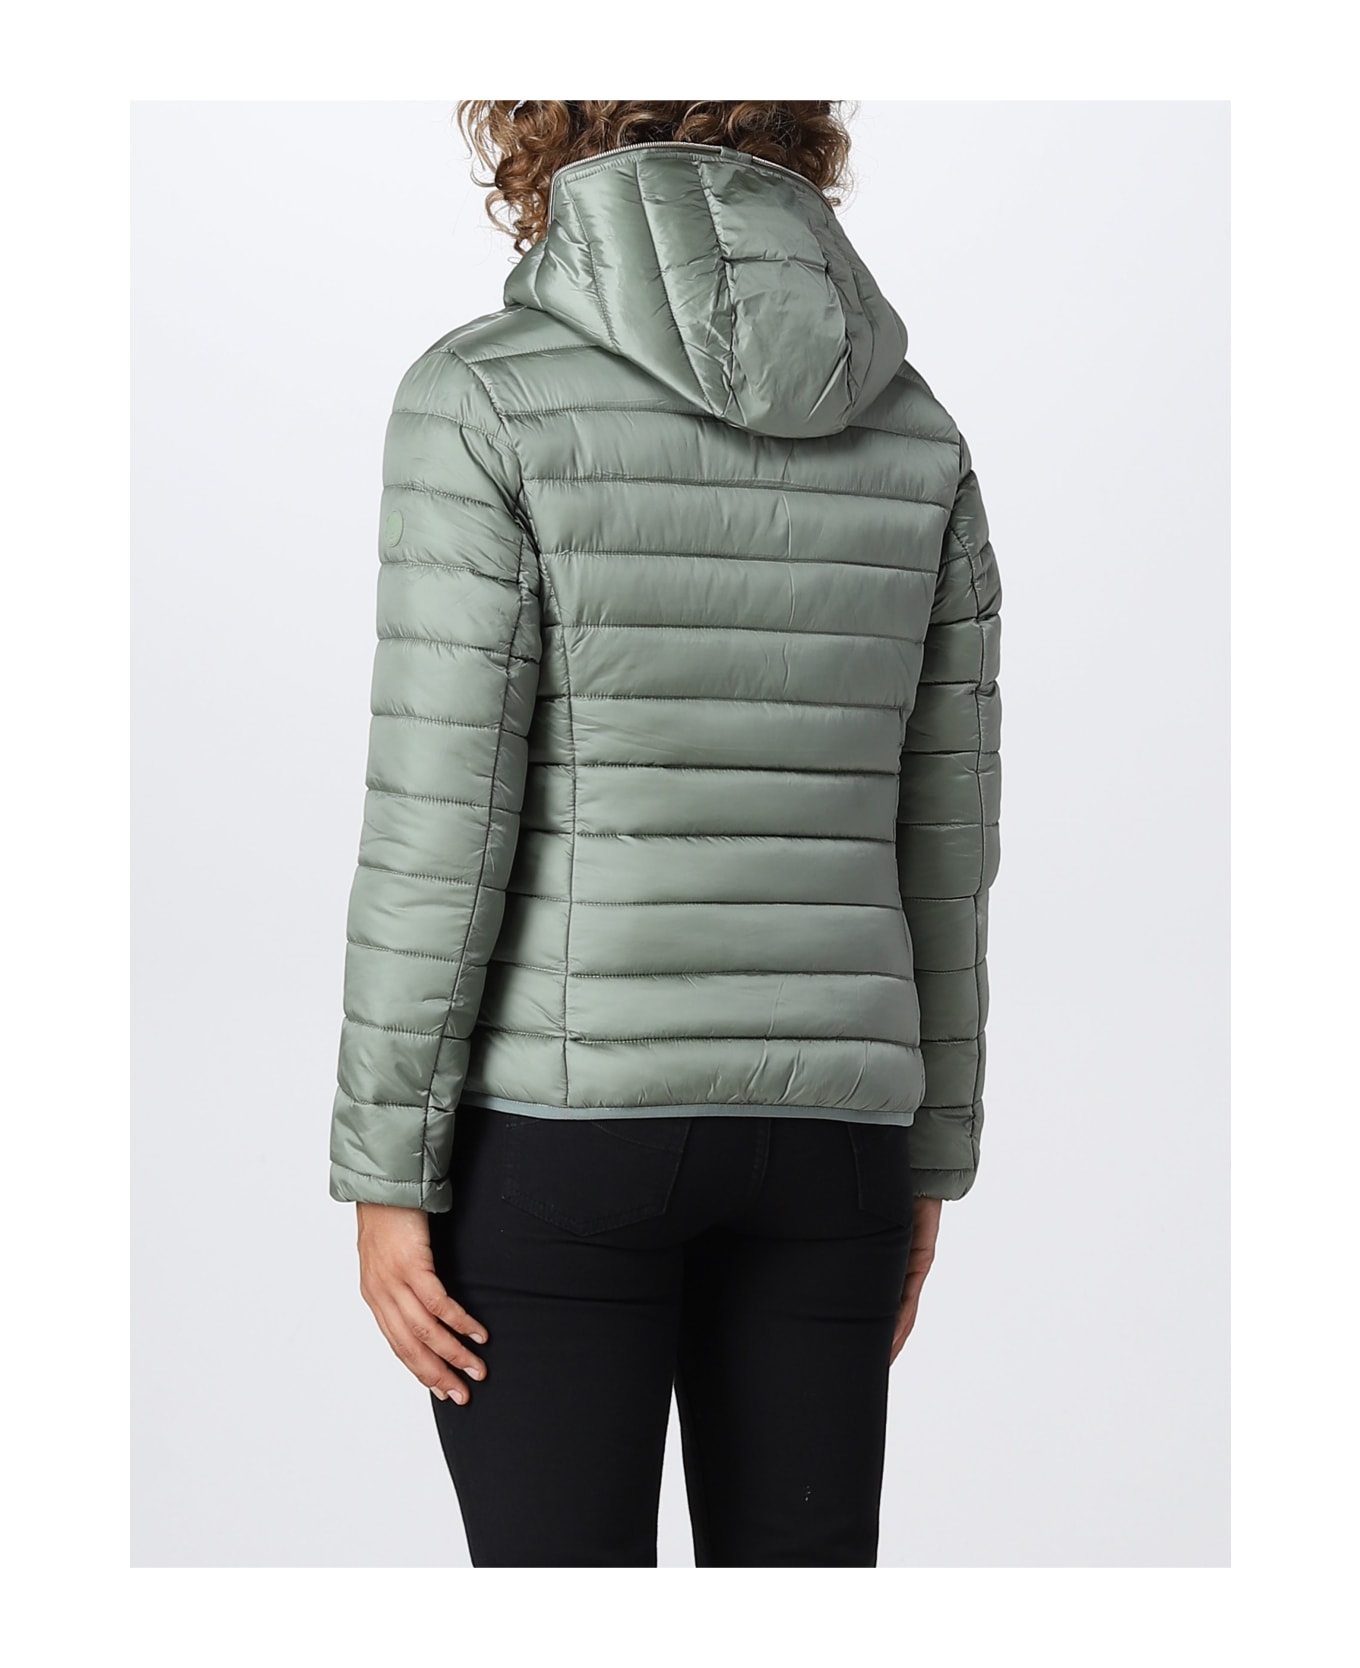 Save the Duck Alexis Jacket | italist, ALWAYS LIKE A SALE